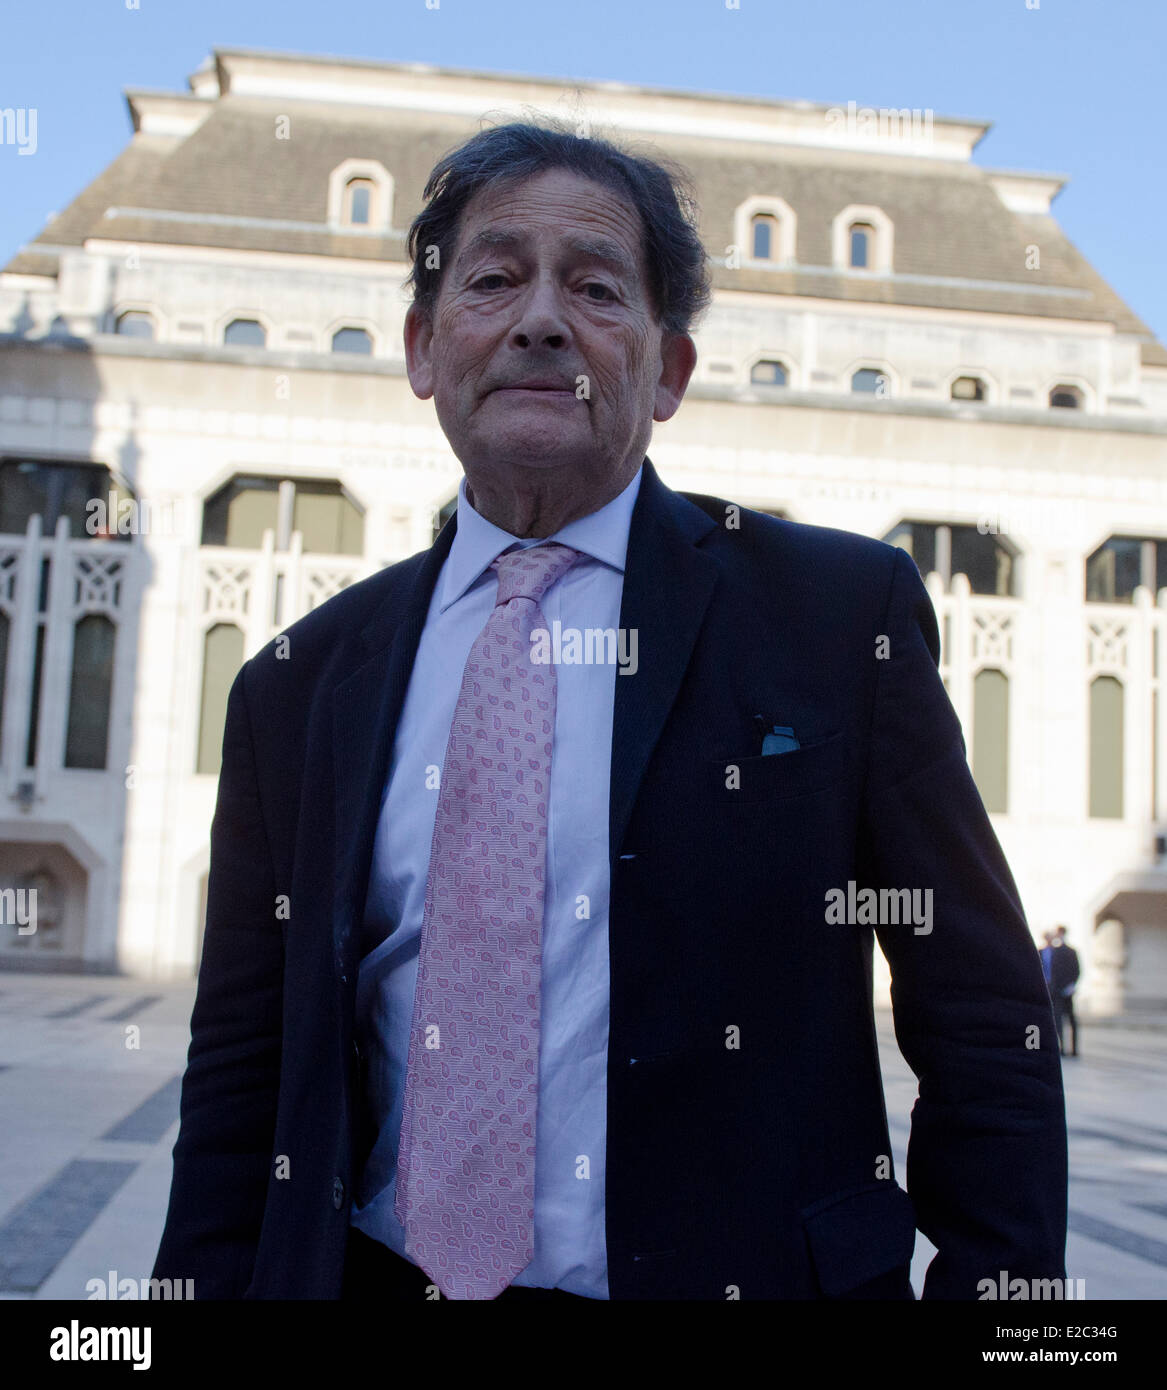 London, UK. 18th June, 2014. Nigel Lawson former chancellor of the exchequer speaker at the Margaret Thatcher Conference on Liberty 2014, Guildhall, London, UK 18th June 2014 Credit:  Prixnews/Alamy Live News Stock Photo